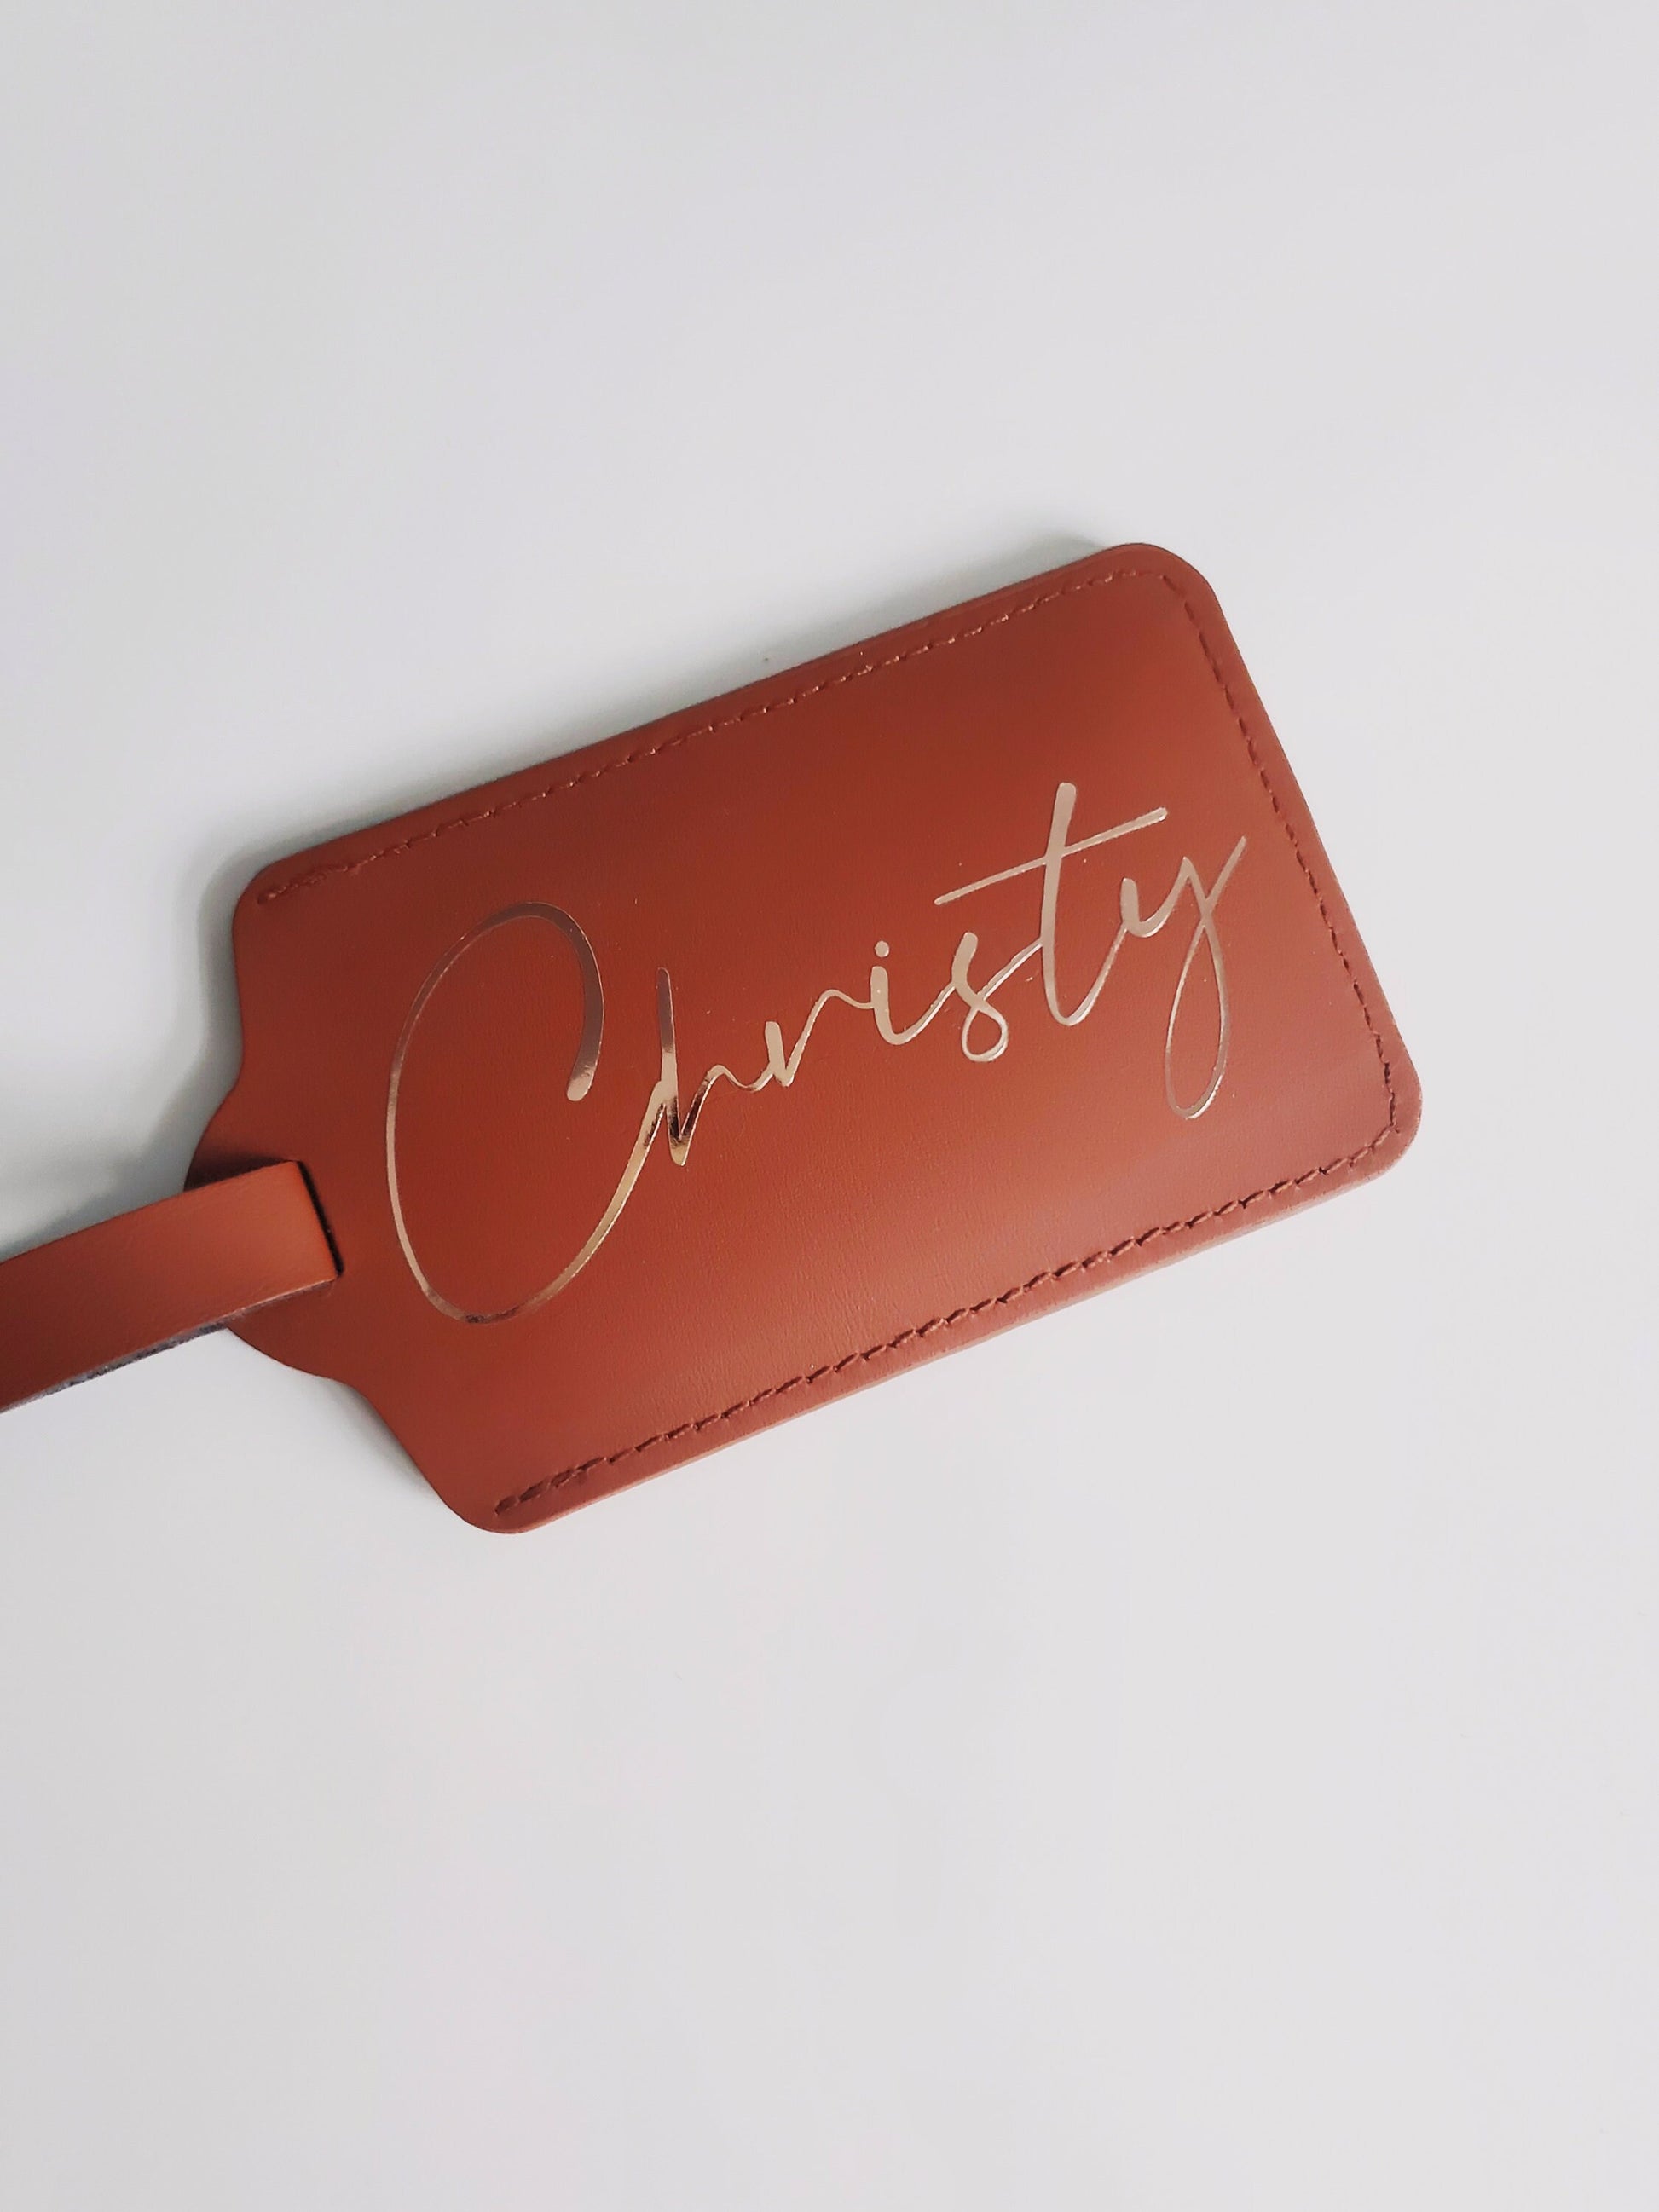 Personalized Leather Luggage Tag Monogrammed Luggage Tag 